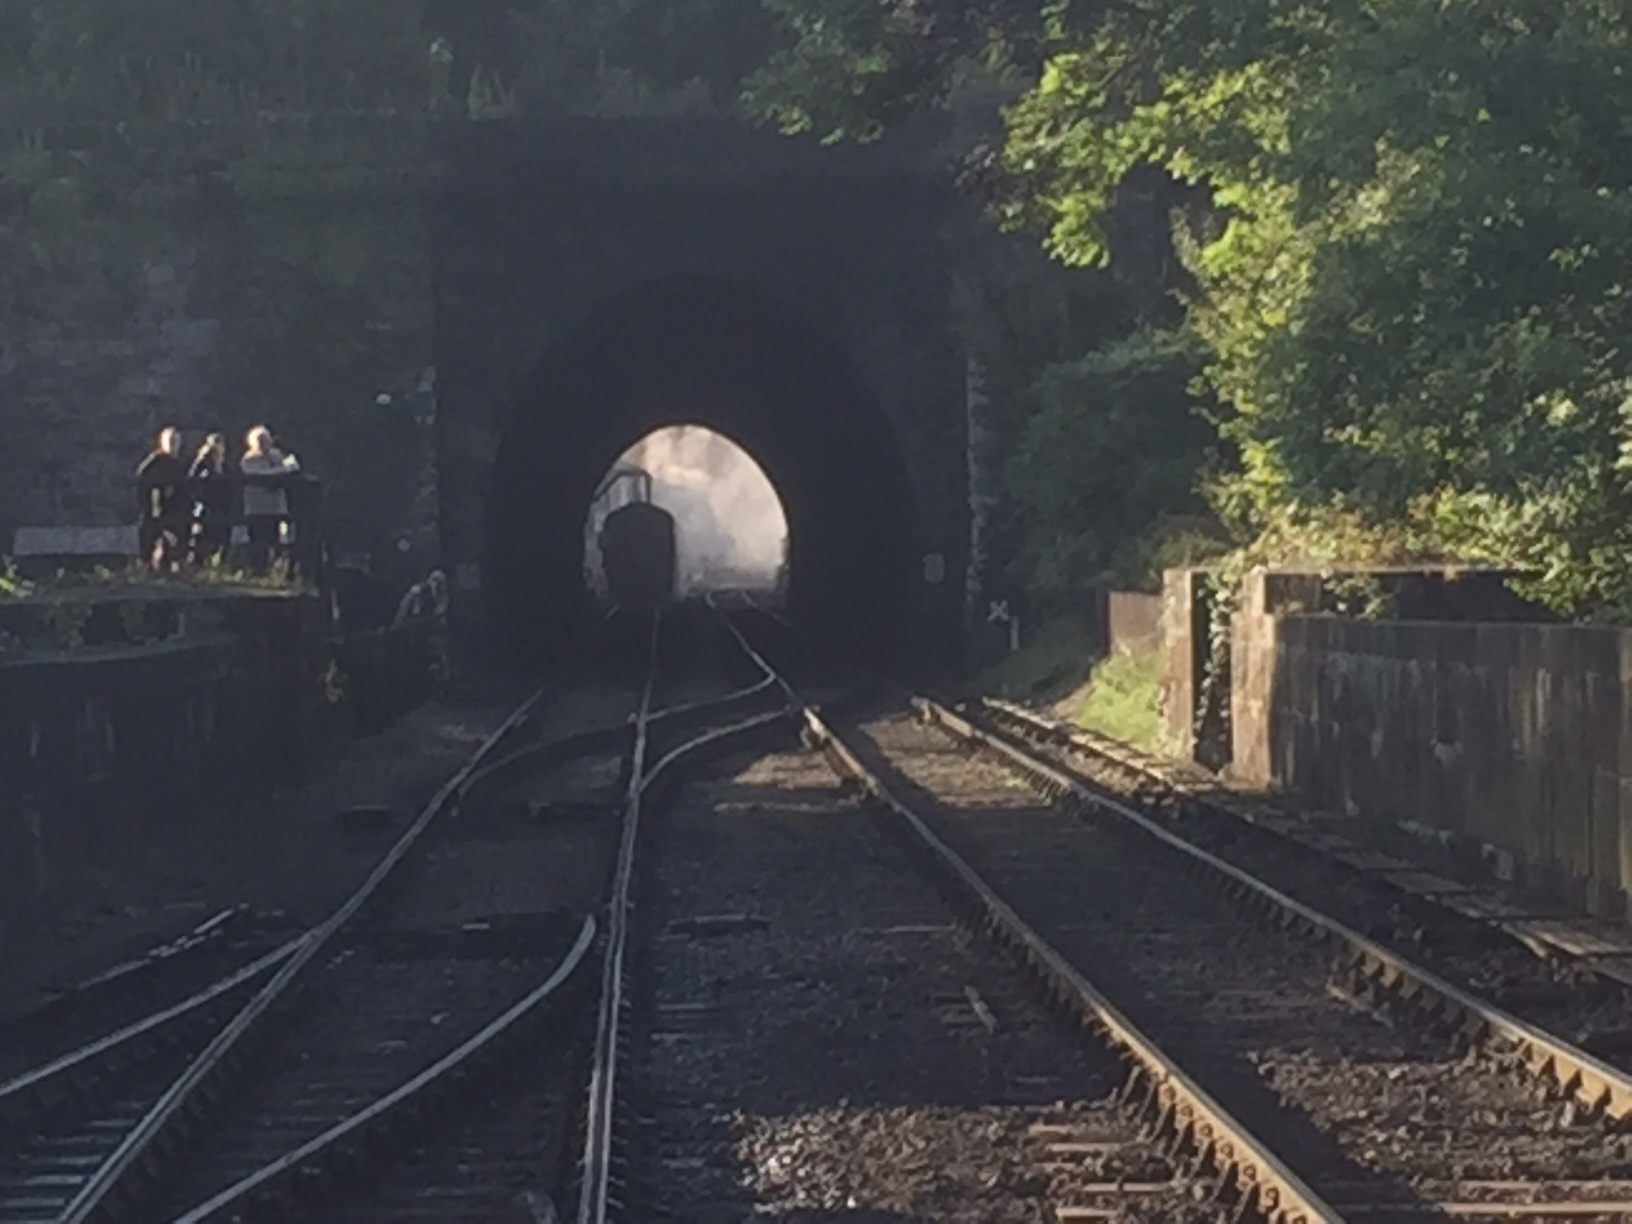 North Yorkshire Moors Railway - NYMR: A glimpse through the tunnel to the magic of the engine sheds.